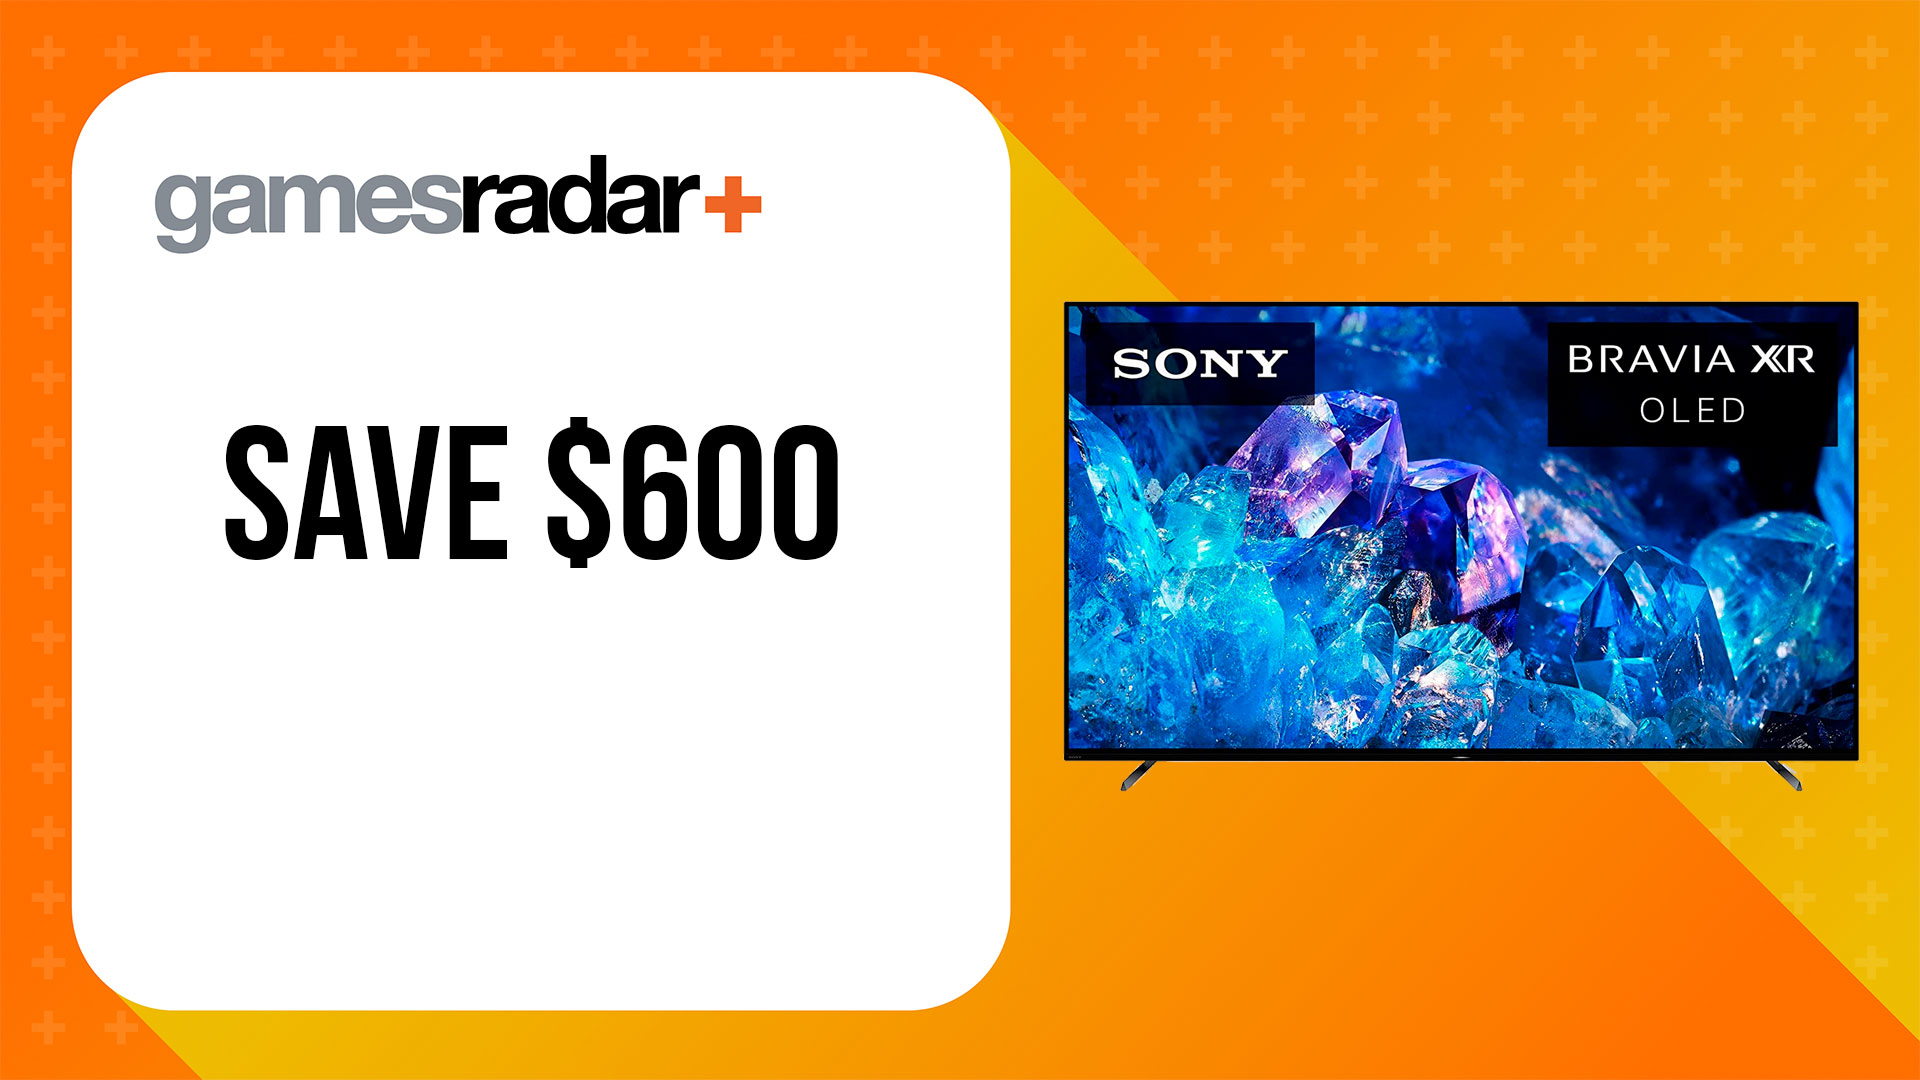 Sony Bravia 65-inch OLED deal - save $600